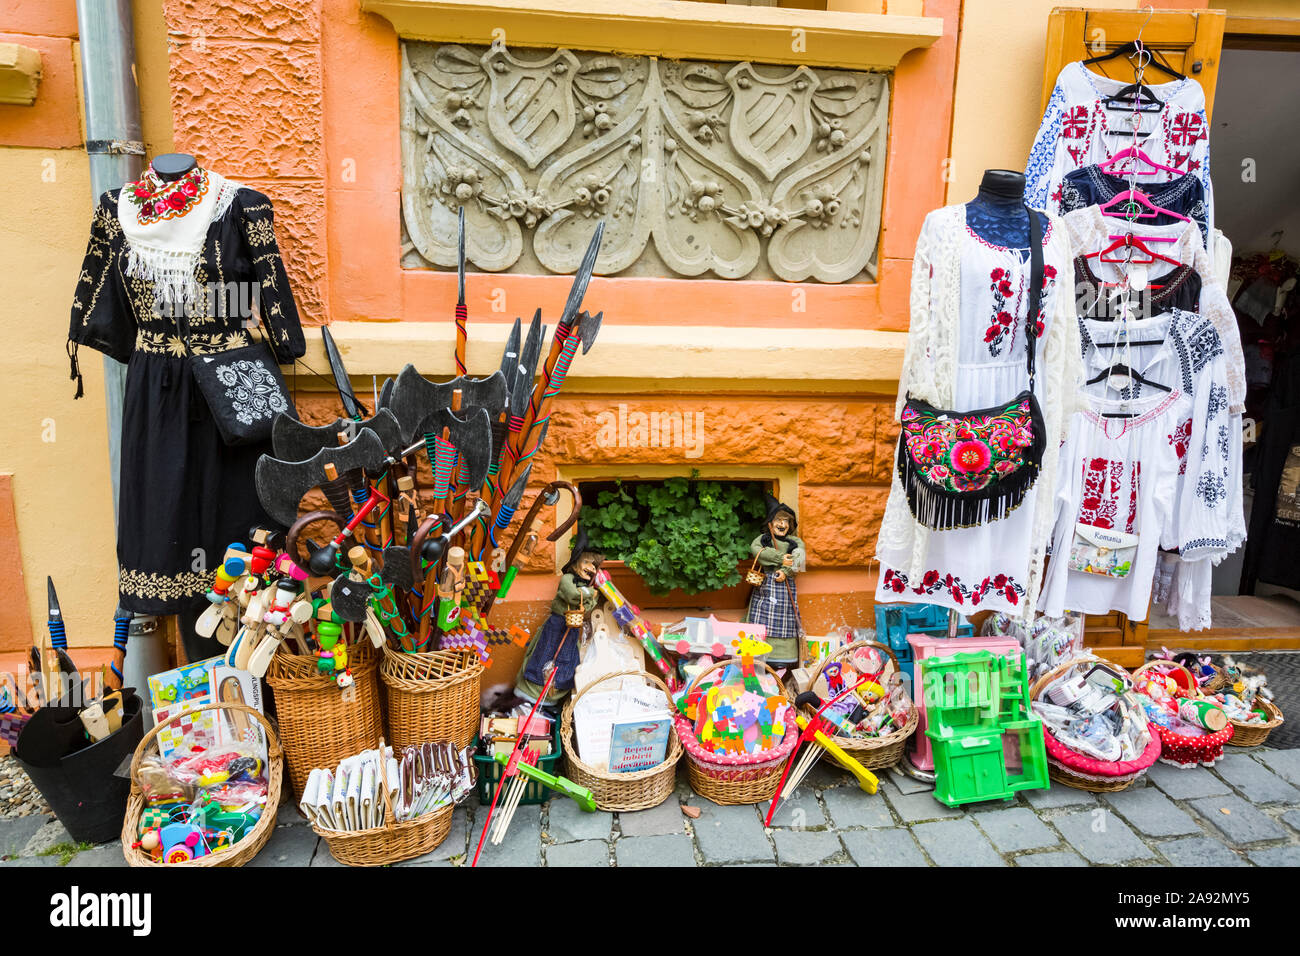 Variety of goods for sale on display on a sidewalk outside a shop; Sighisoara, Mures County, Transylvania Region, Romania Stock Photo